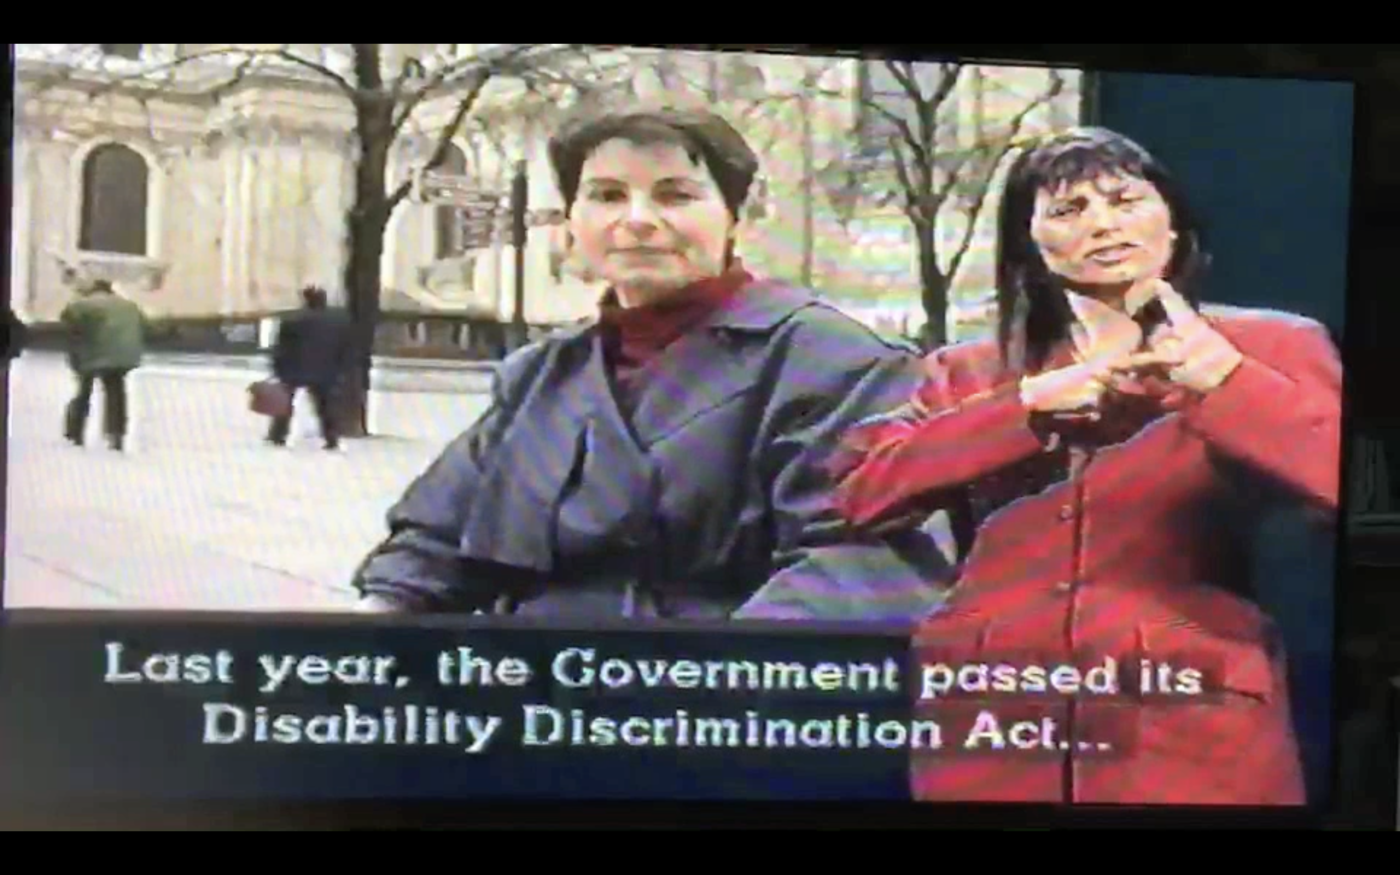 Screenshot from broadcast shows Liz Crow in medium shot to camera, with the Palace of Westminster in the background. Captions read 'Last year, the Government passed its Disability Discrimination Act...' To the right of screen is a BSL interpreter.